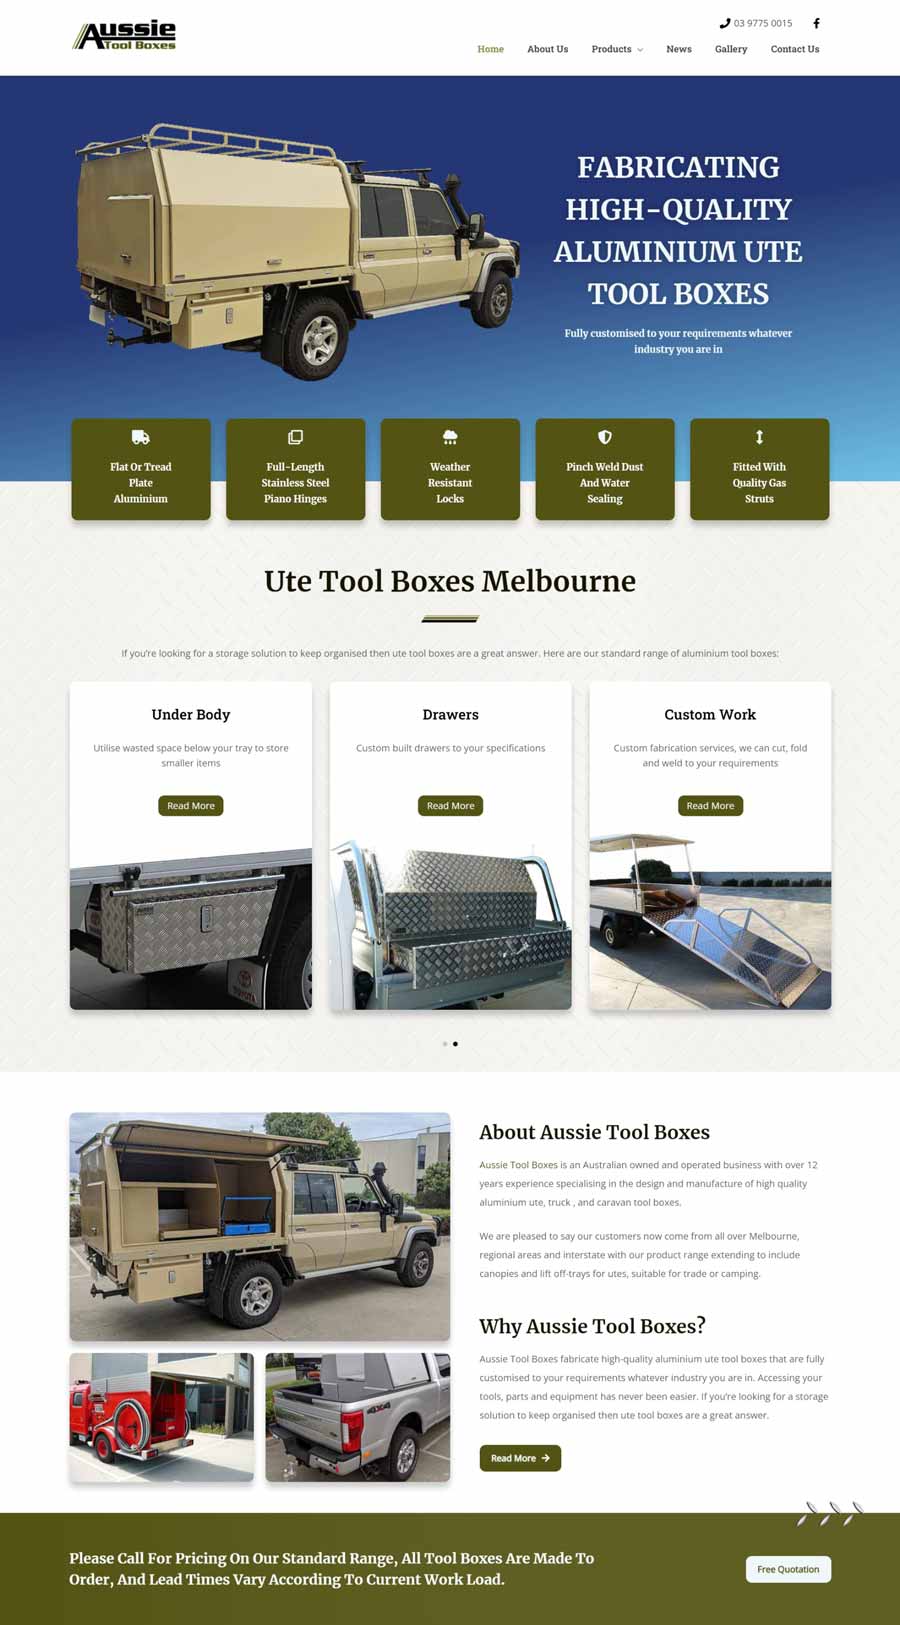 Aussie Tool Boxes homepage